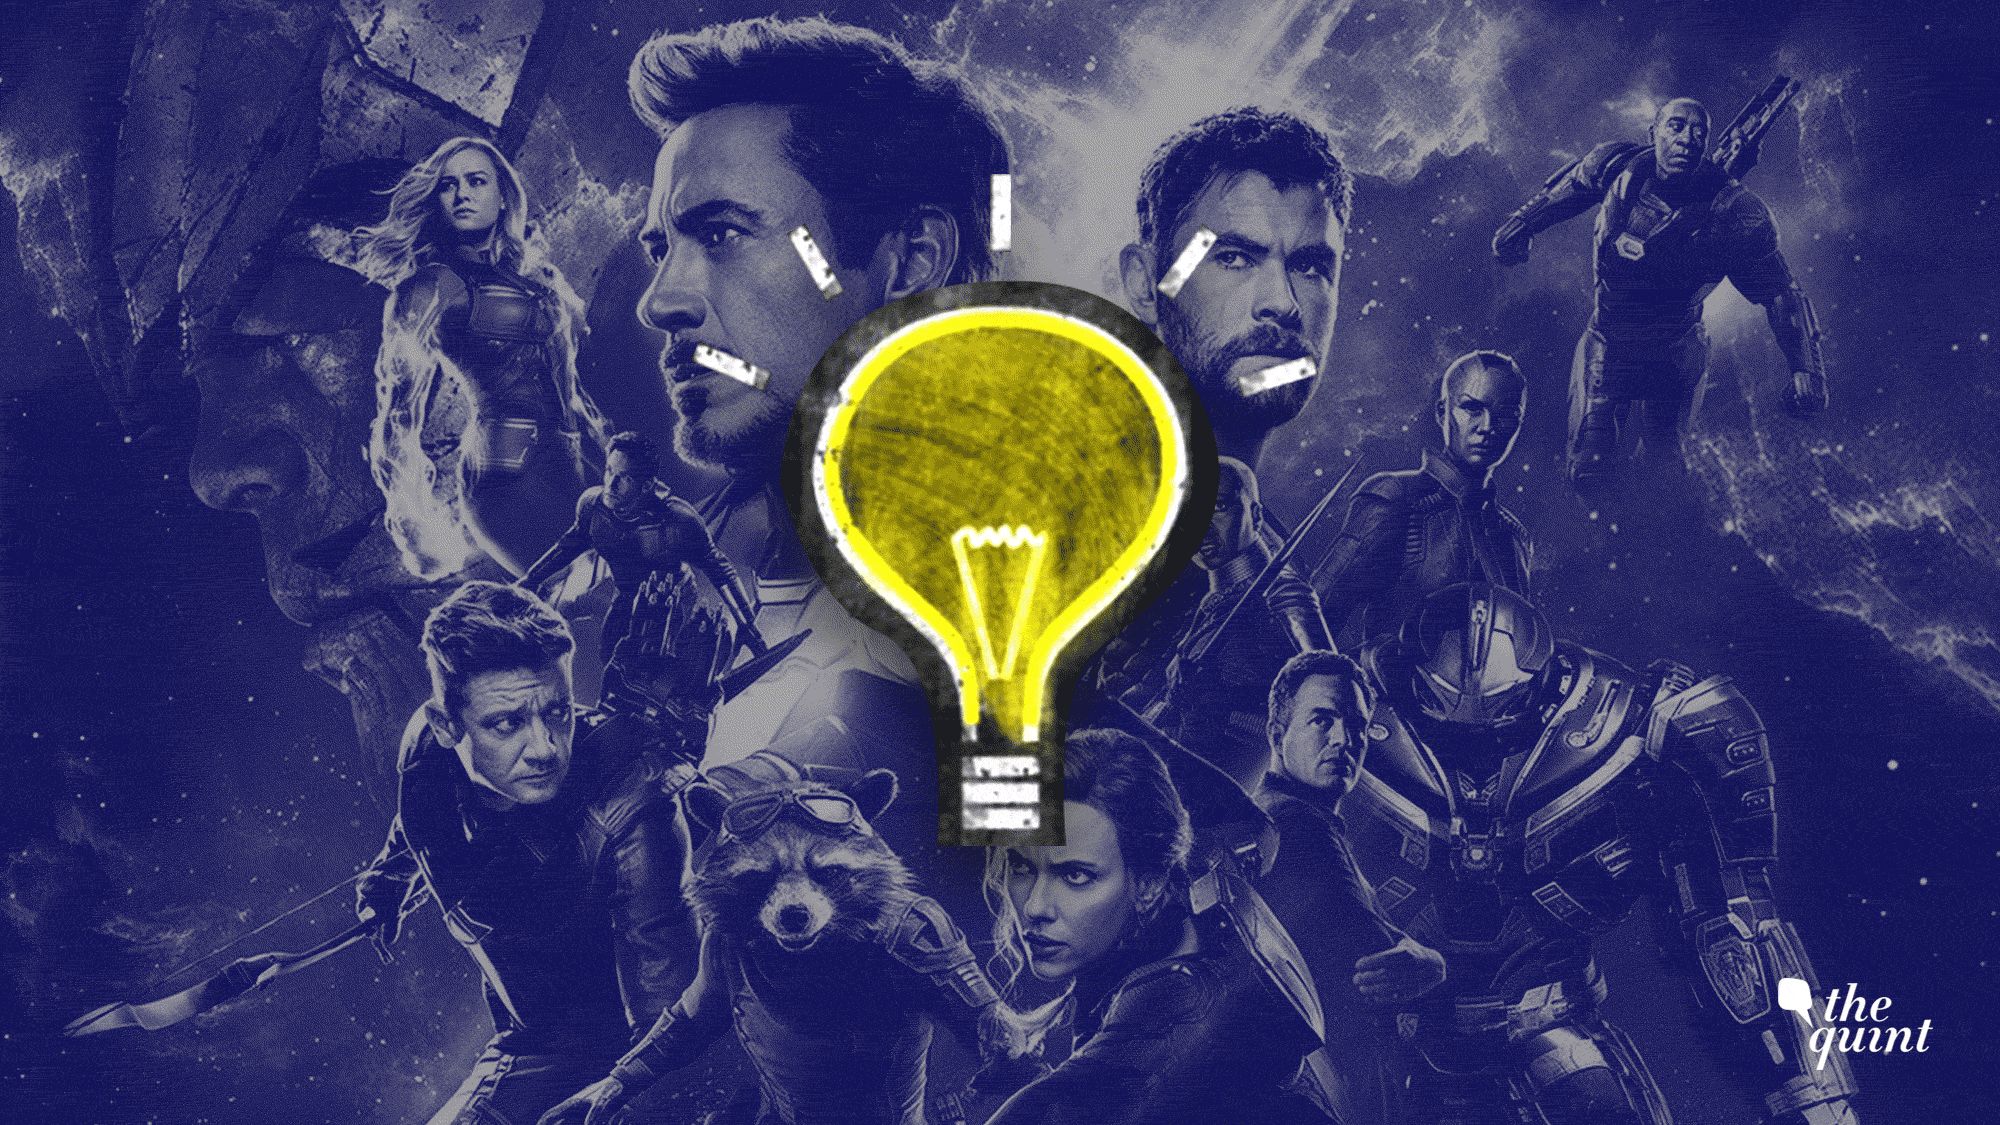 Take the Avengers fan quiz to test your marvel universe knowledge.